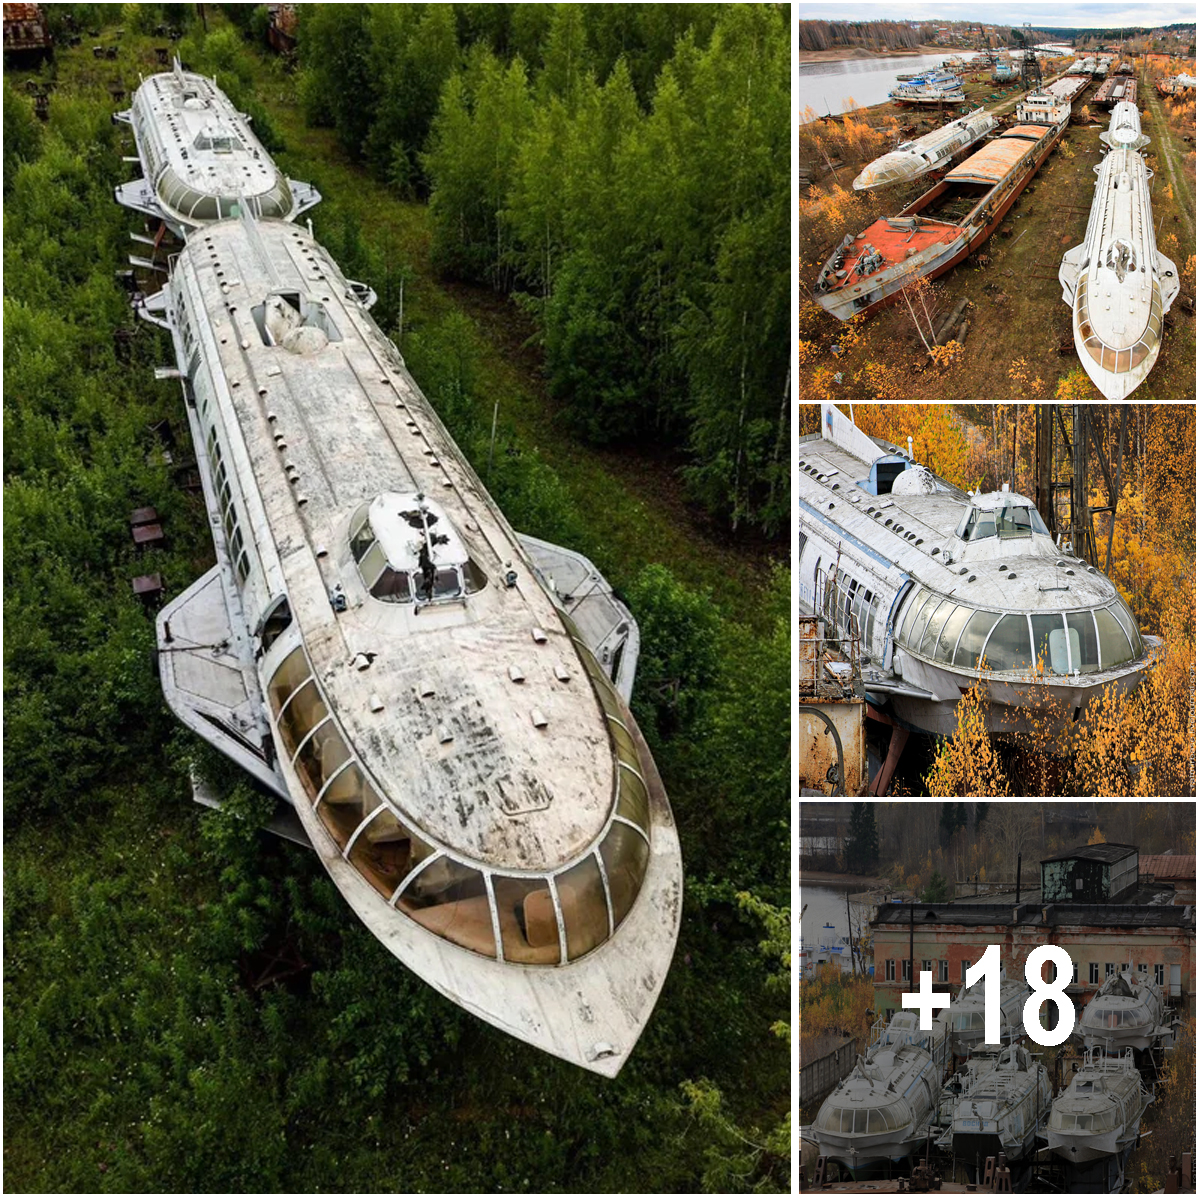 For more than 20 years, these handsome ships have been standing and slowly decaying under the influence of time. The only water they see is rain falling from the sky